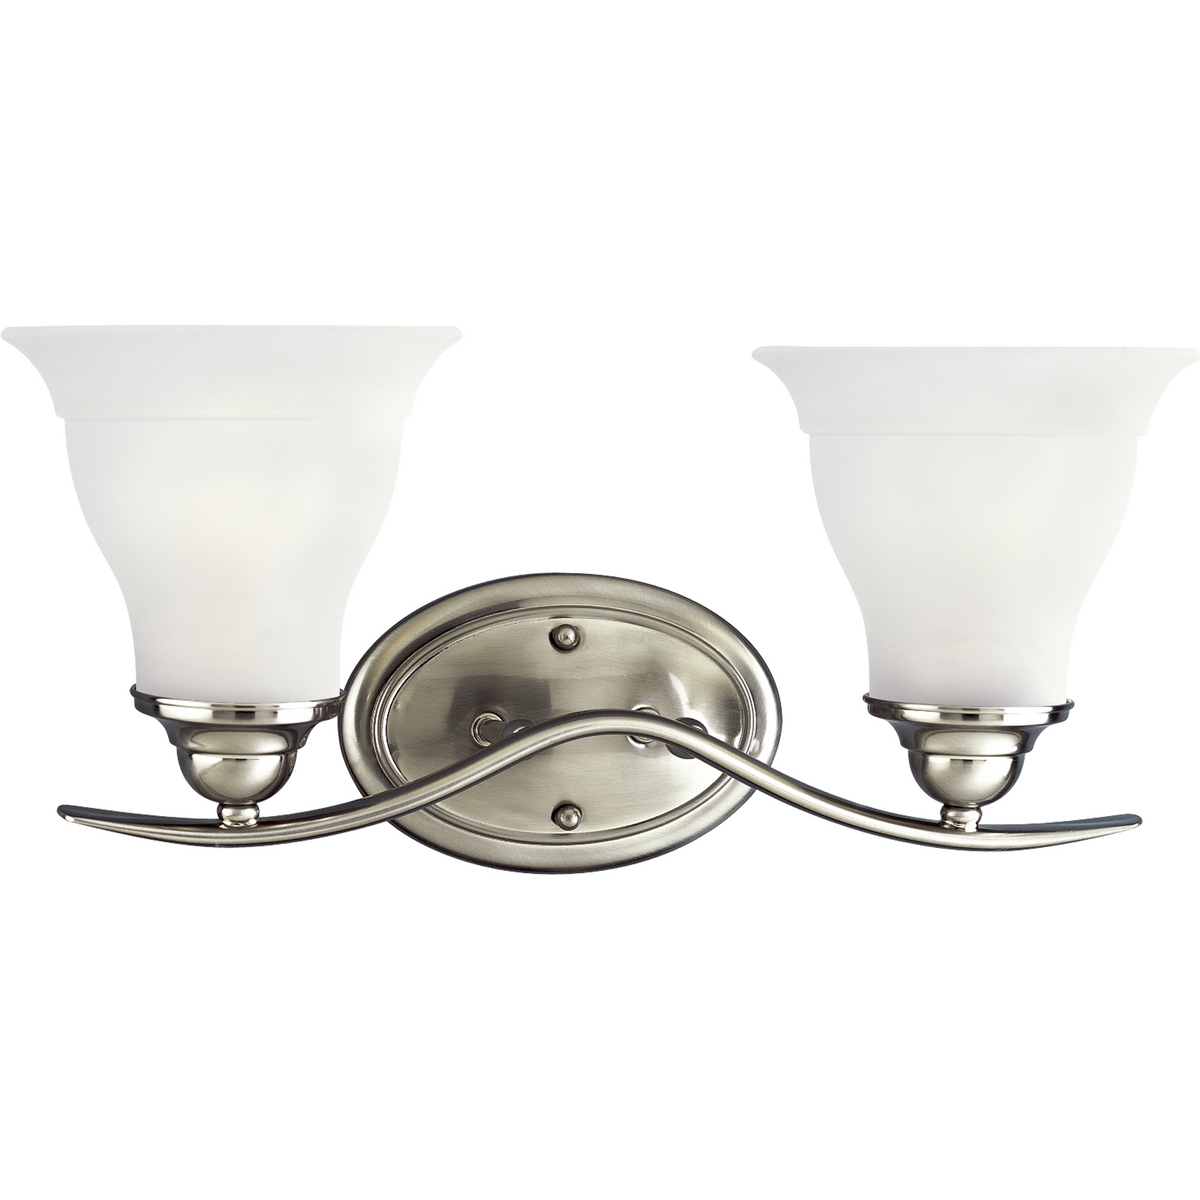 Two-light bath fixture featuring soft angles, curving lines and etched glass shades that mount up or down. Gracefully exotic, the Trinity Collection offers classic sophistication for transitional interiors. Sculptural forms of metal and glass are enhanced by a classic finish. This transitional style can transform a room or your whole home with its charming versatility. Brushed Nickel finish.